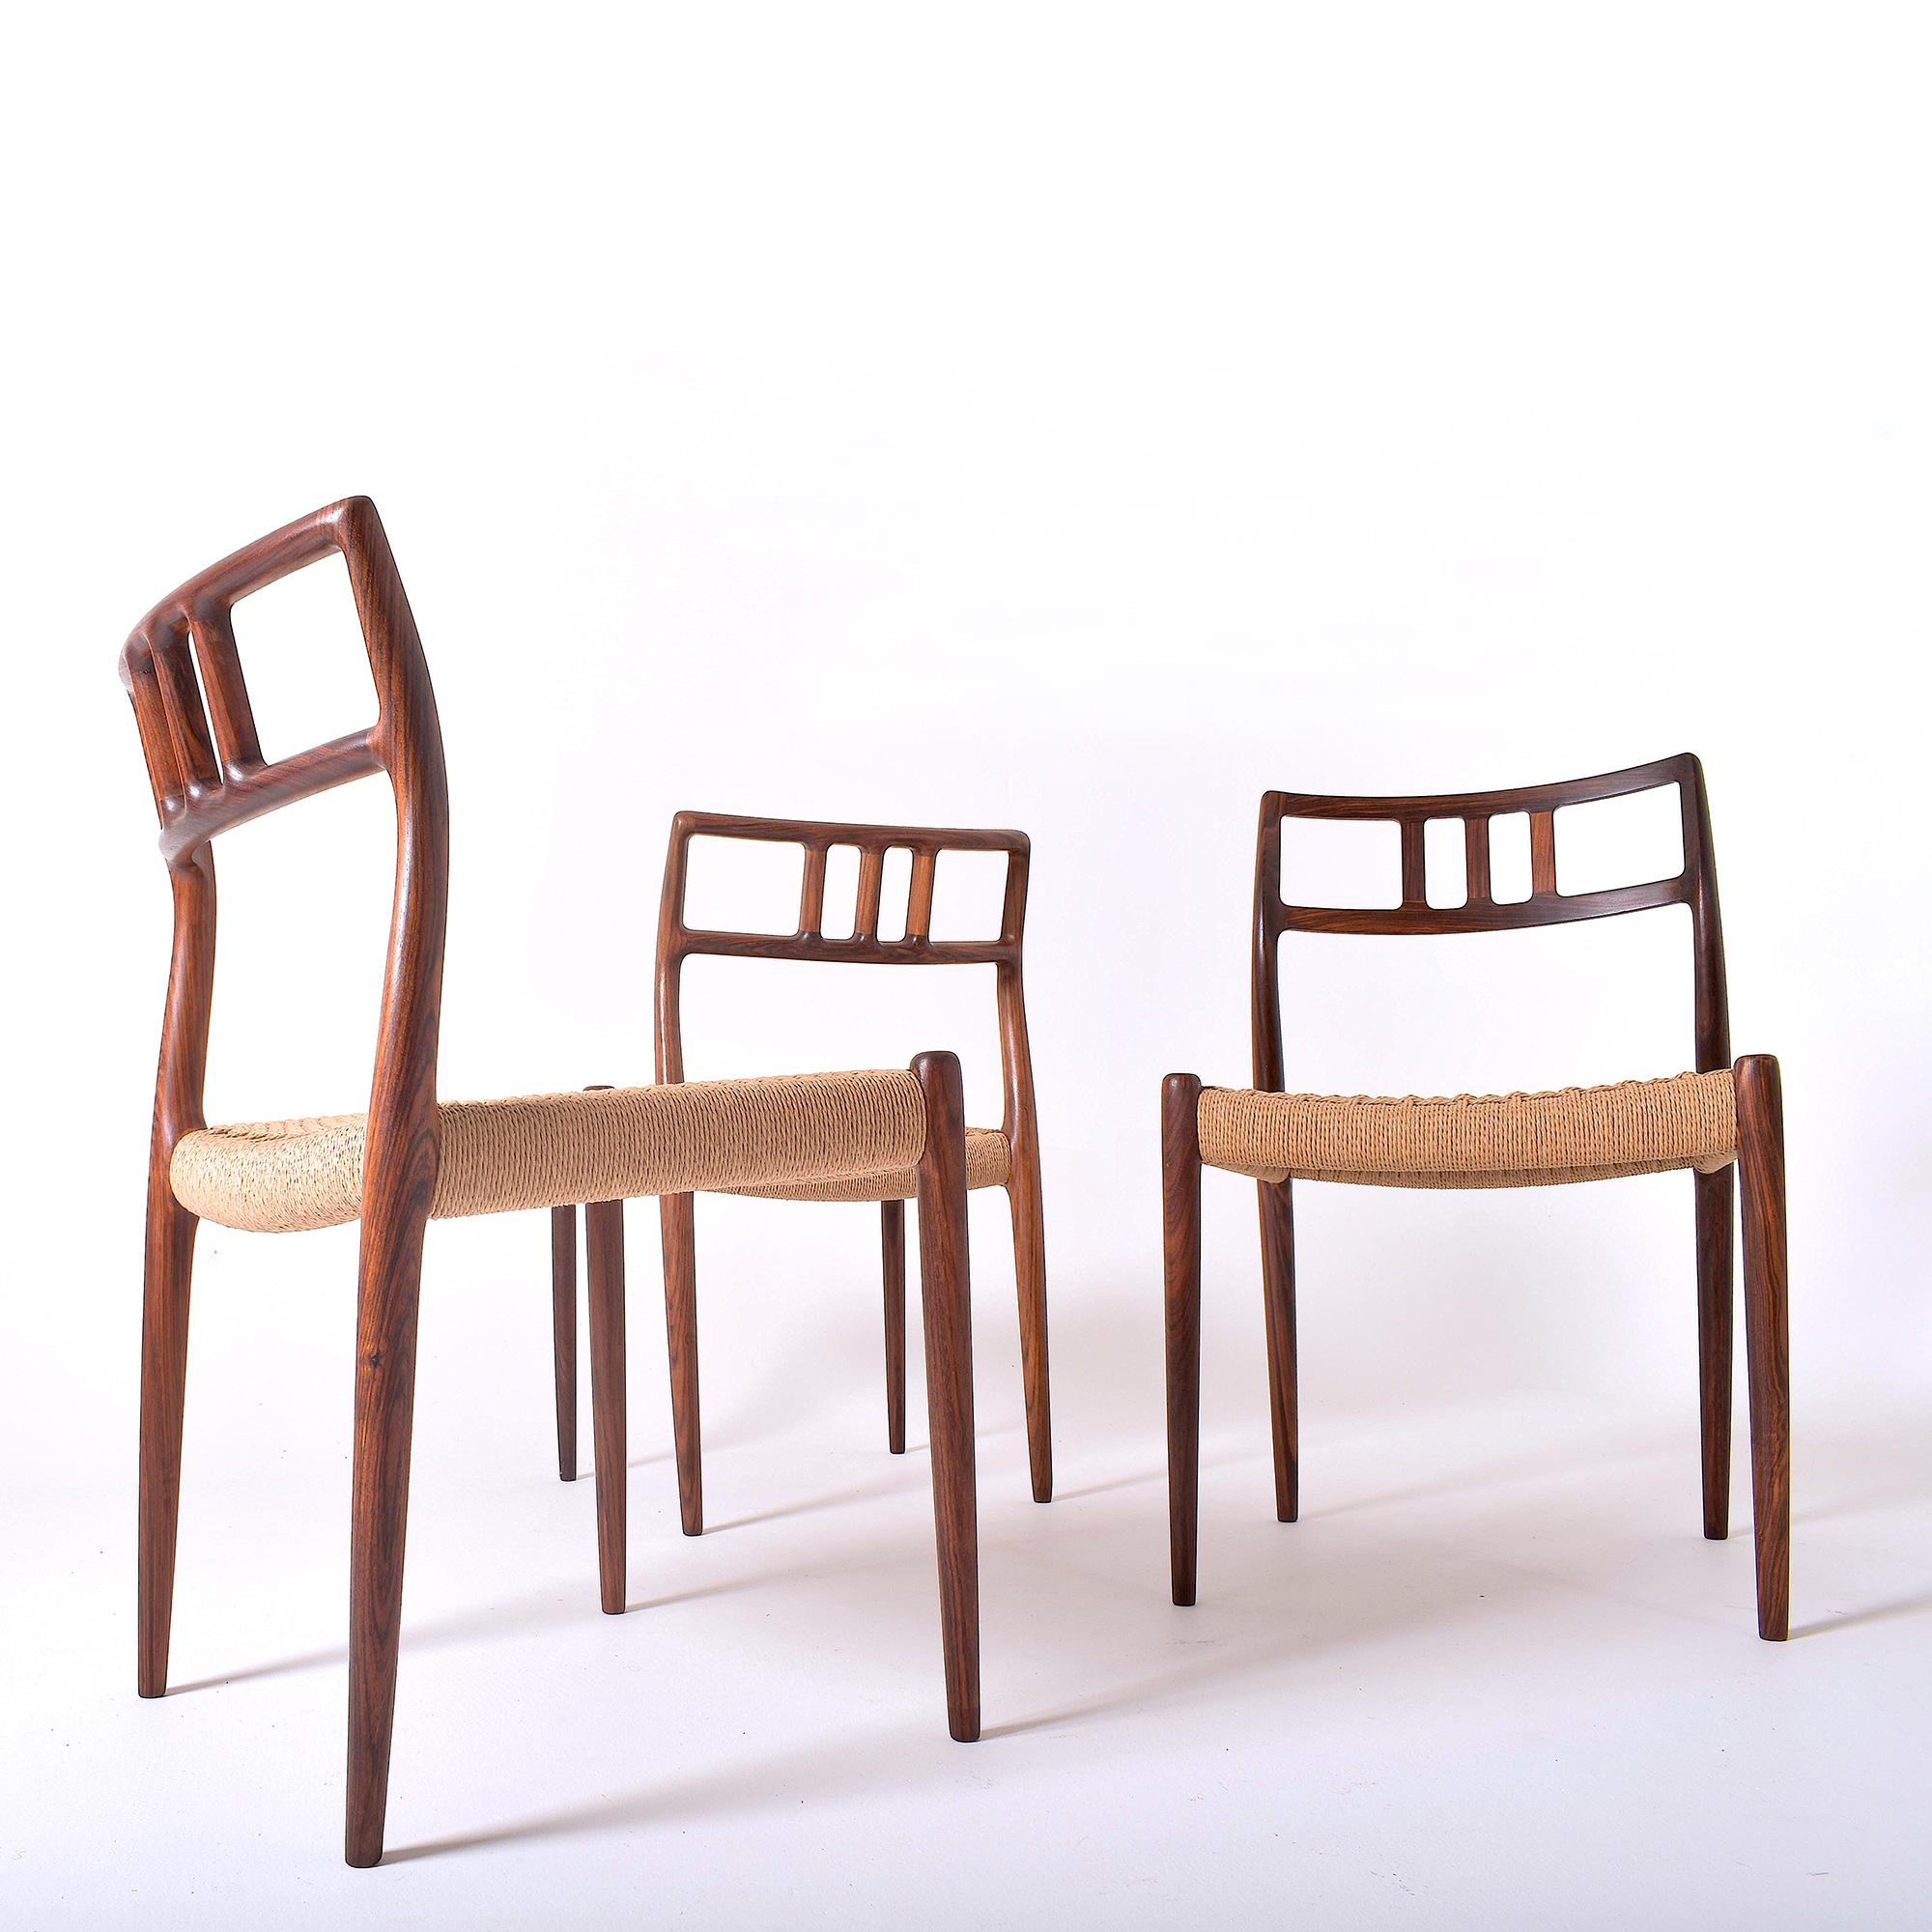 Nice set of 4 Danish dining chairs, in beautiful condition, oil finished wood and freshly renewed papercord seats. Designed by Niels Otto Moller for J.L. Møllers Møbelfabrik in Denmark, circa 1968.